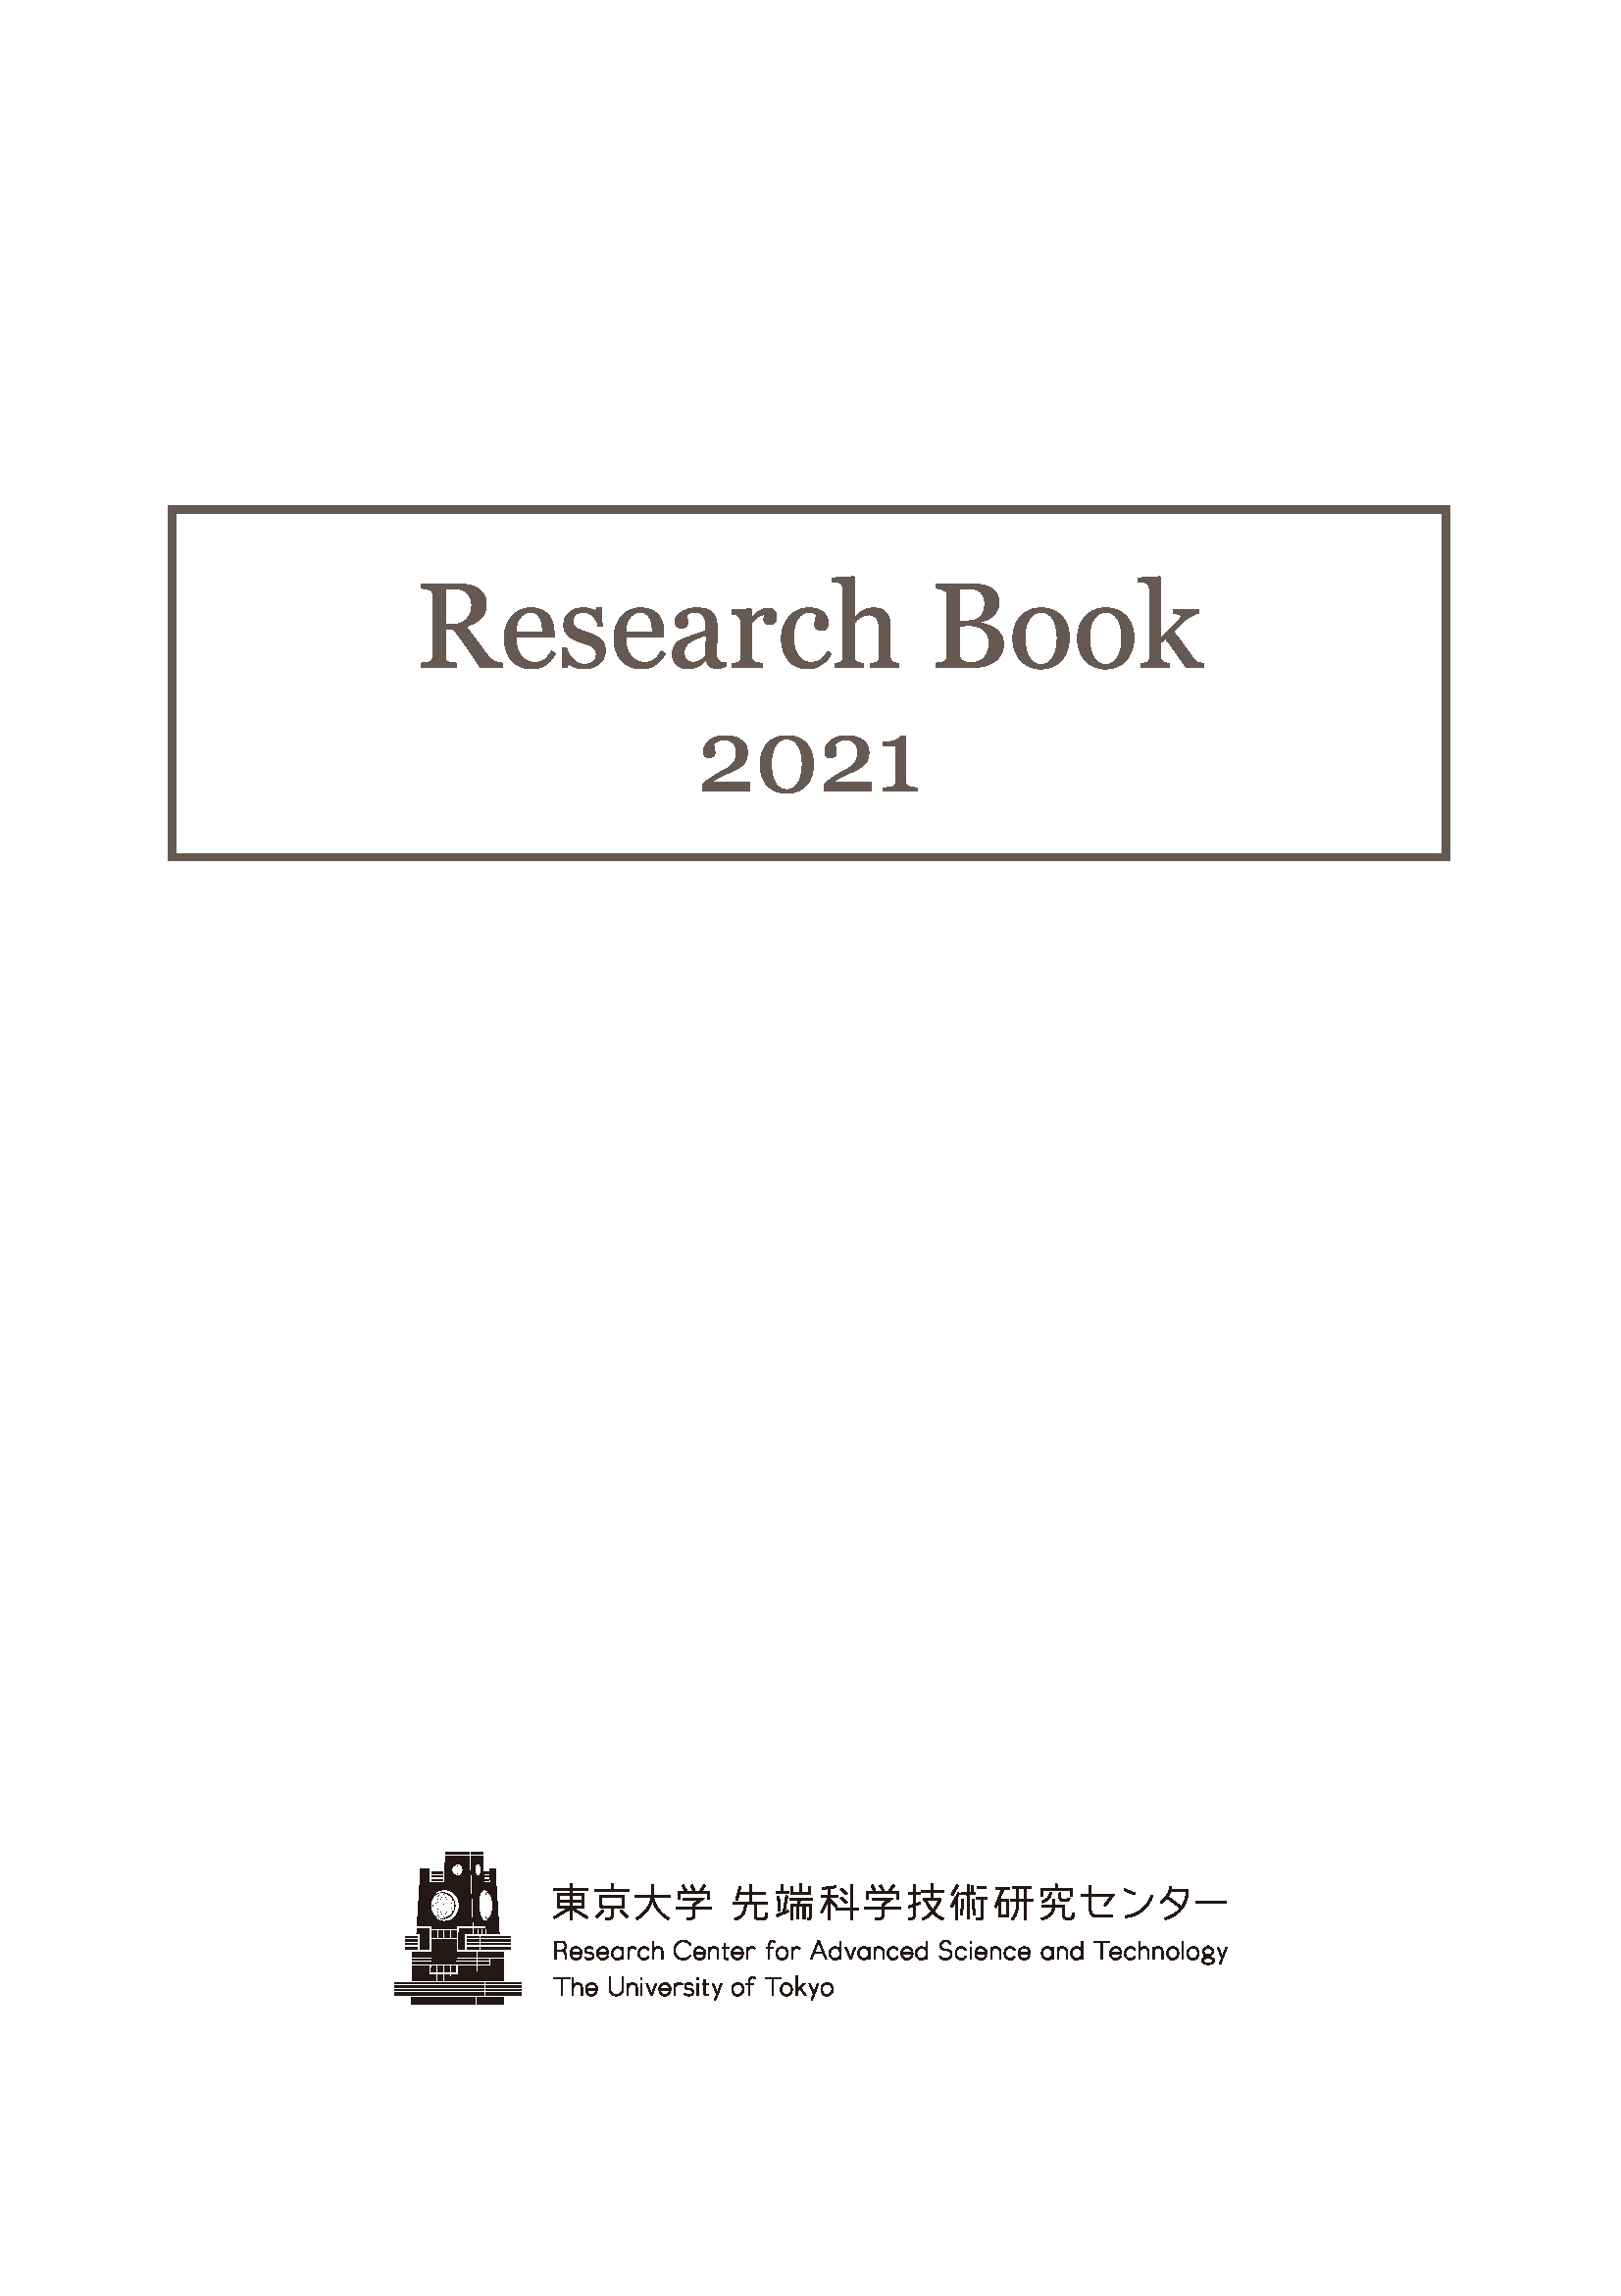 2021 Research BOOK cover